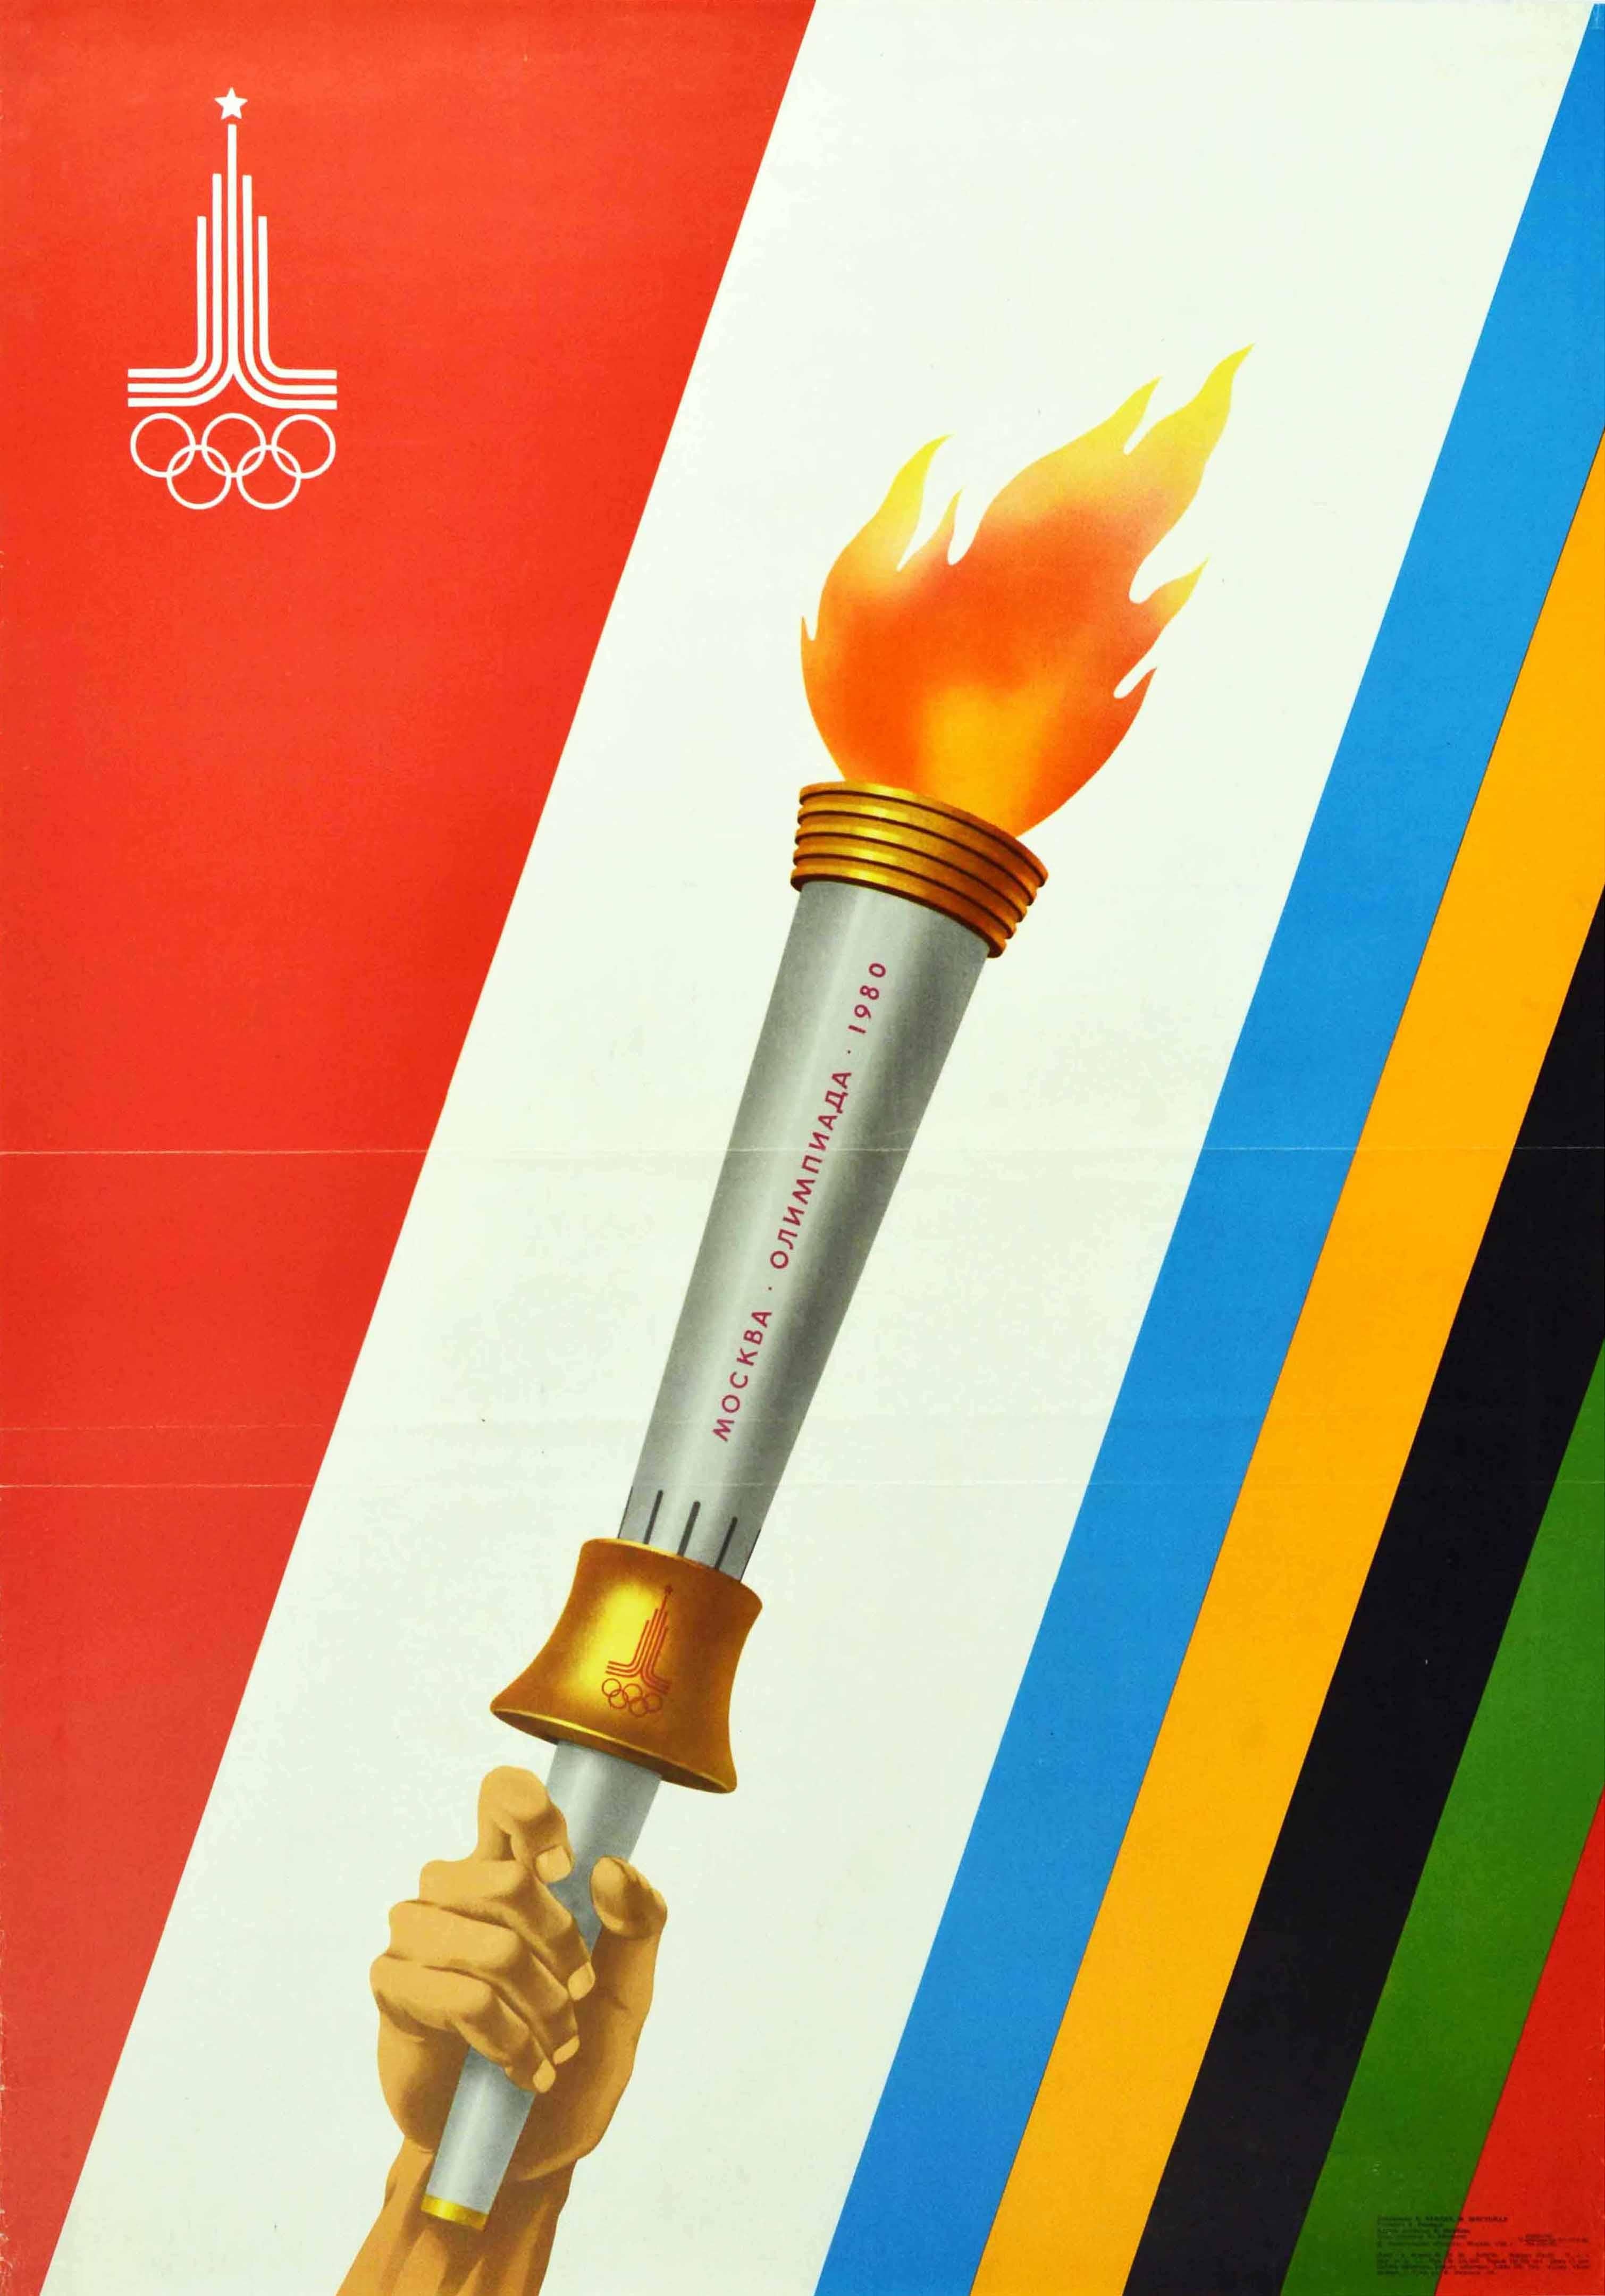 Unknown Print - Original Vintage Poster Moscow Summer Olympics 1980 Moskva Olympic Torch Design